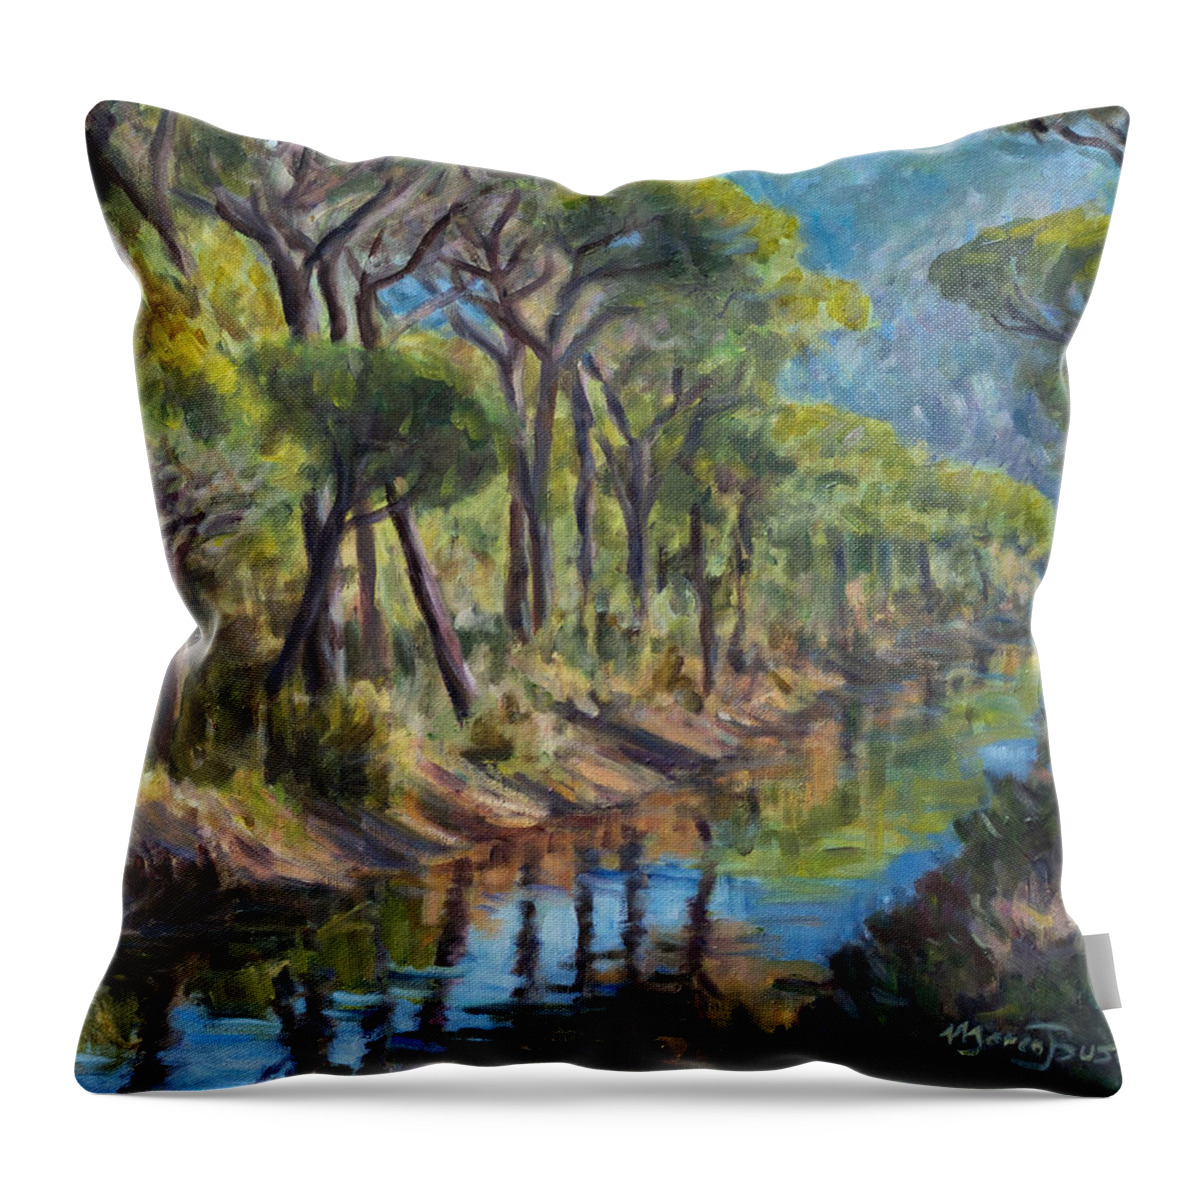 Pine Tree Mediterranean Wood Tuscany Maremma Canal Italy Throw Pillow featuring the painting Pine Wood Reflections by Marco Busoni